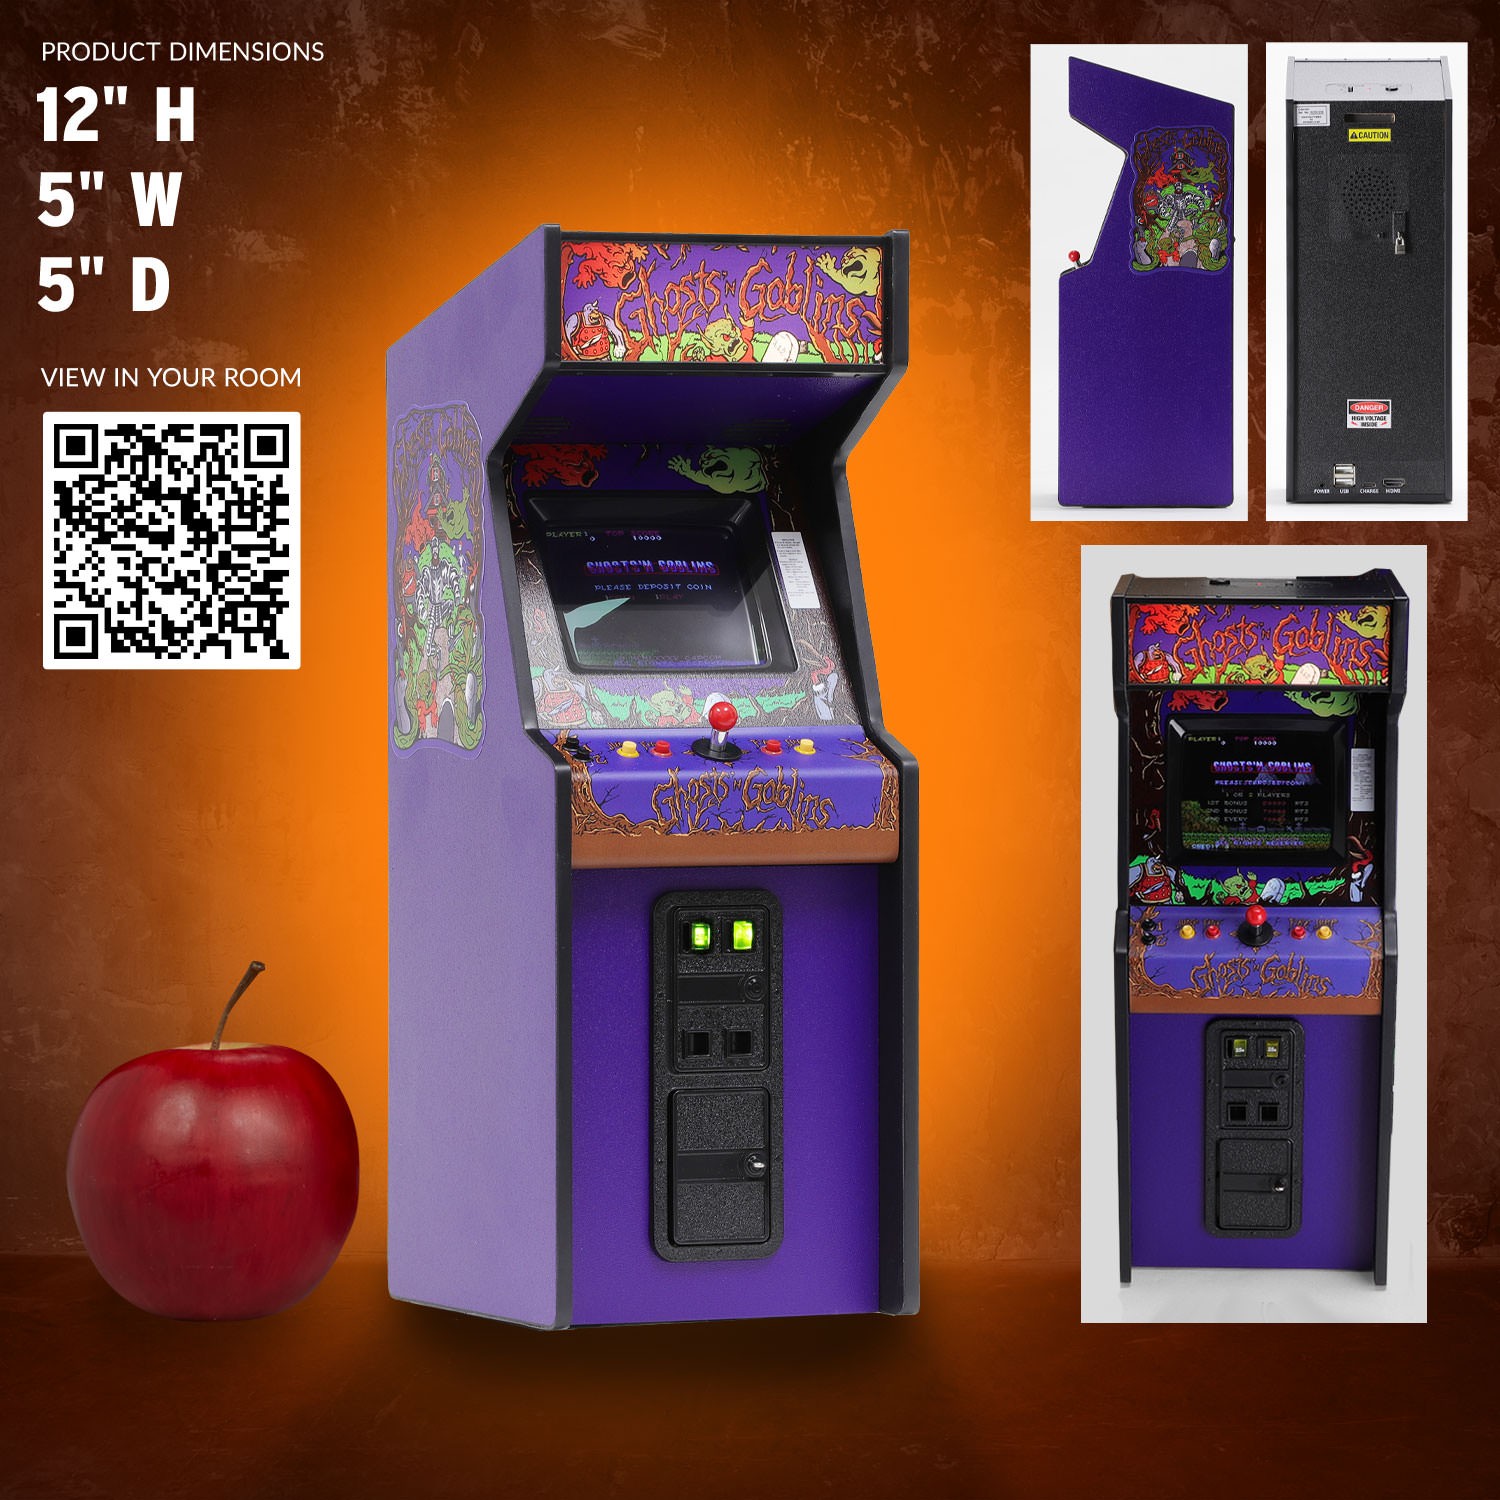 Ghost'n Goblins Arcade, lots of new parts and LCD monitor, sharp-Delivery  time 6-8 weeks